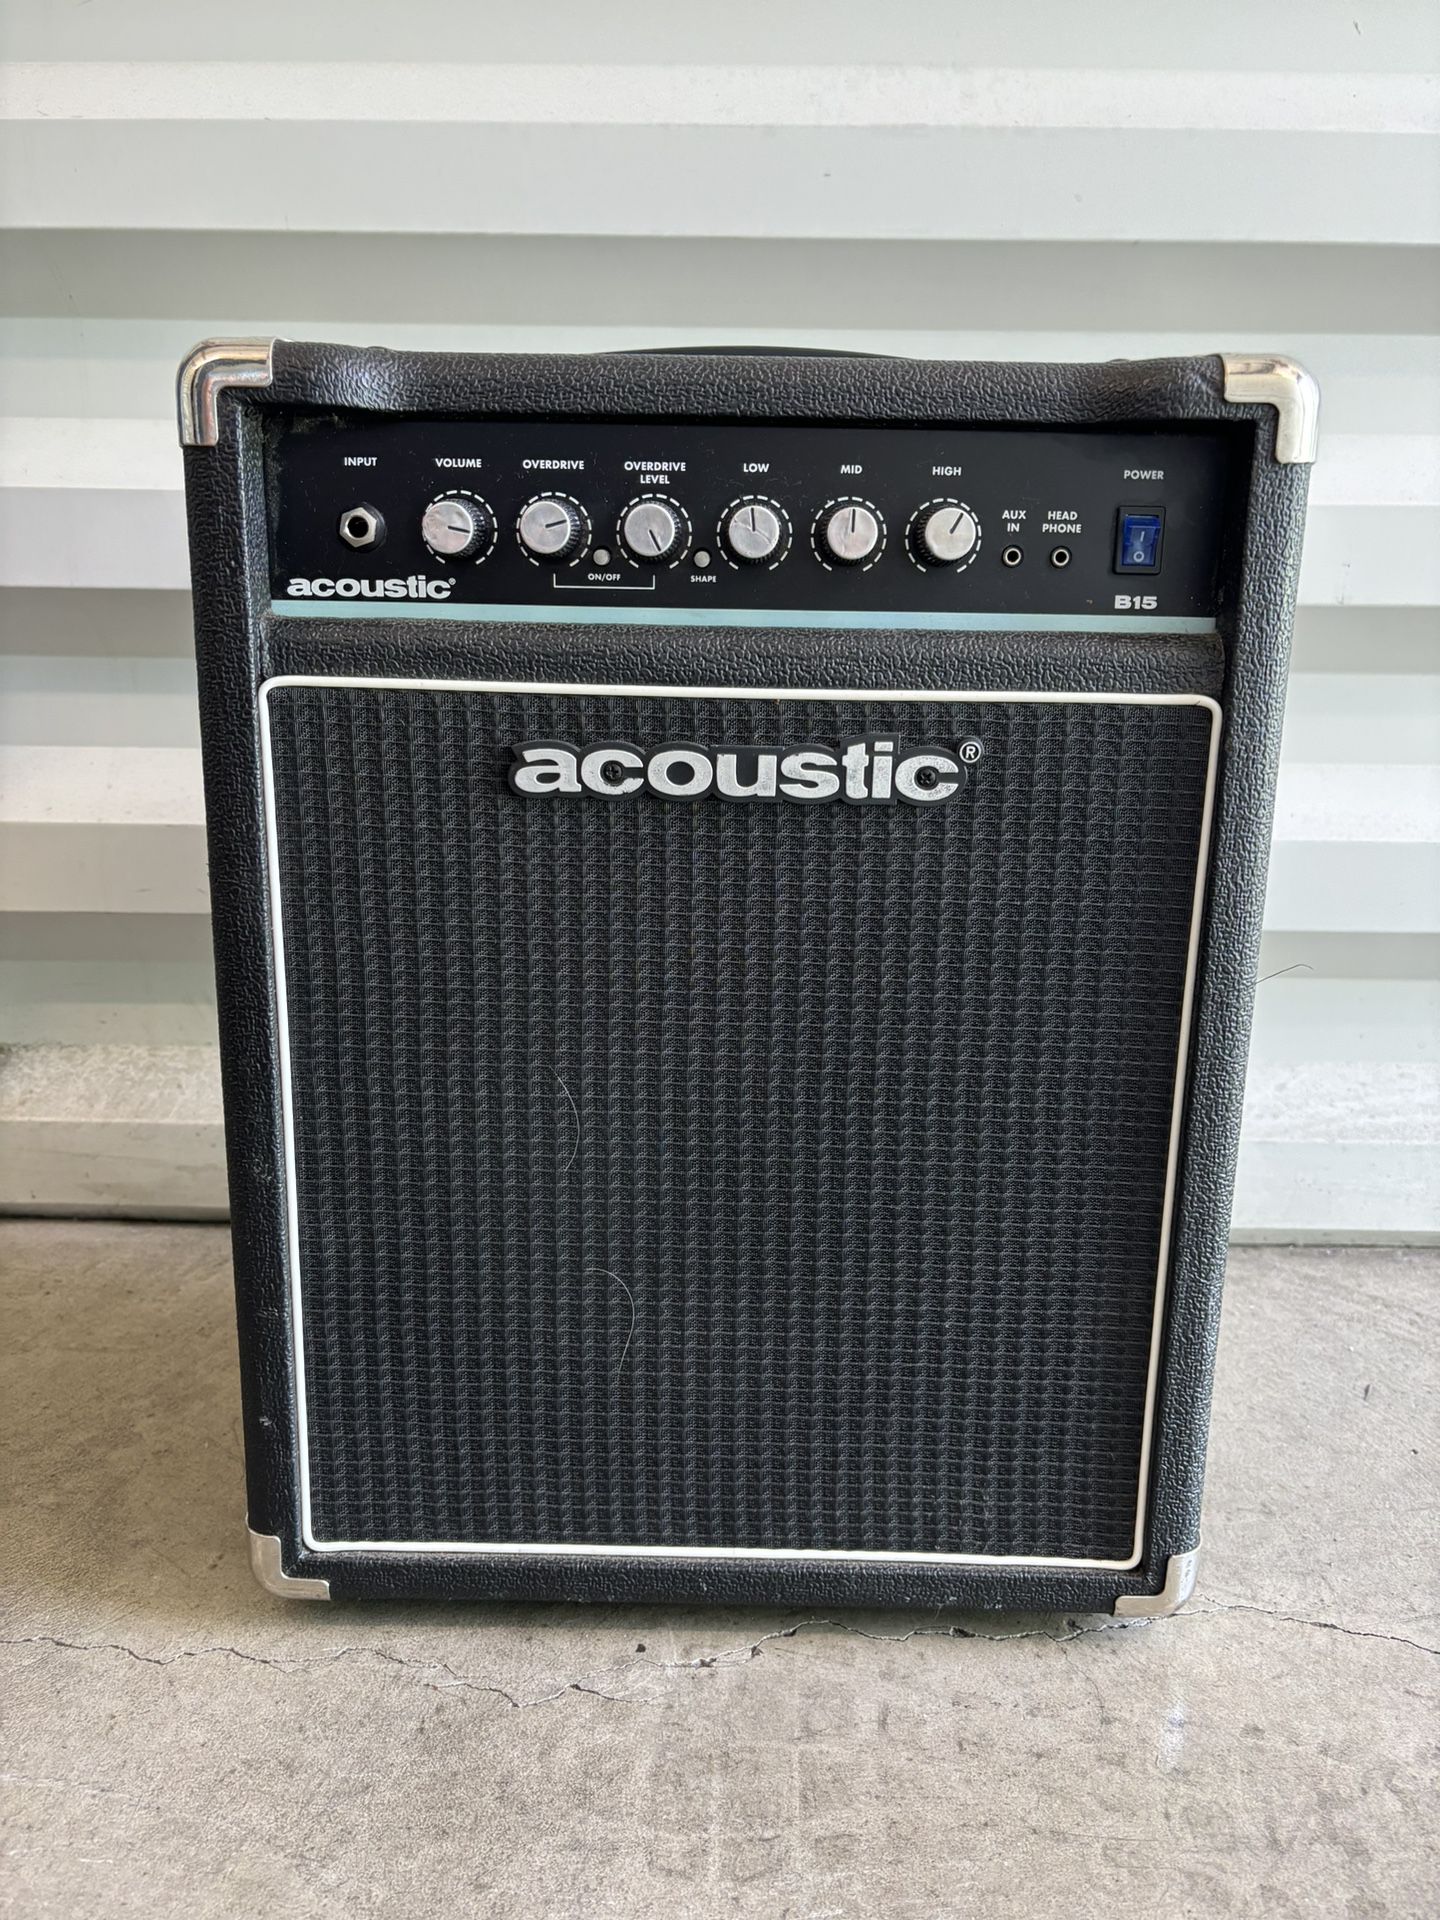 Acoustic Amp For Bass